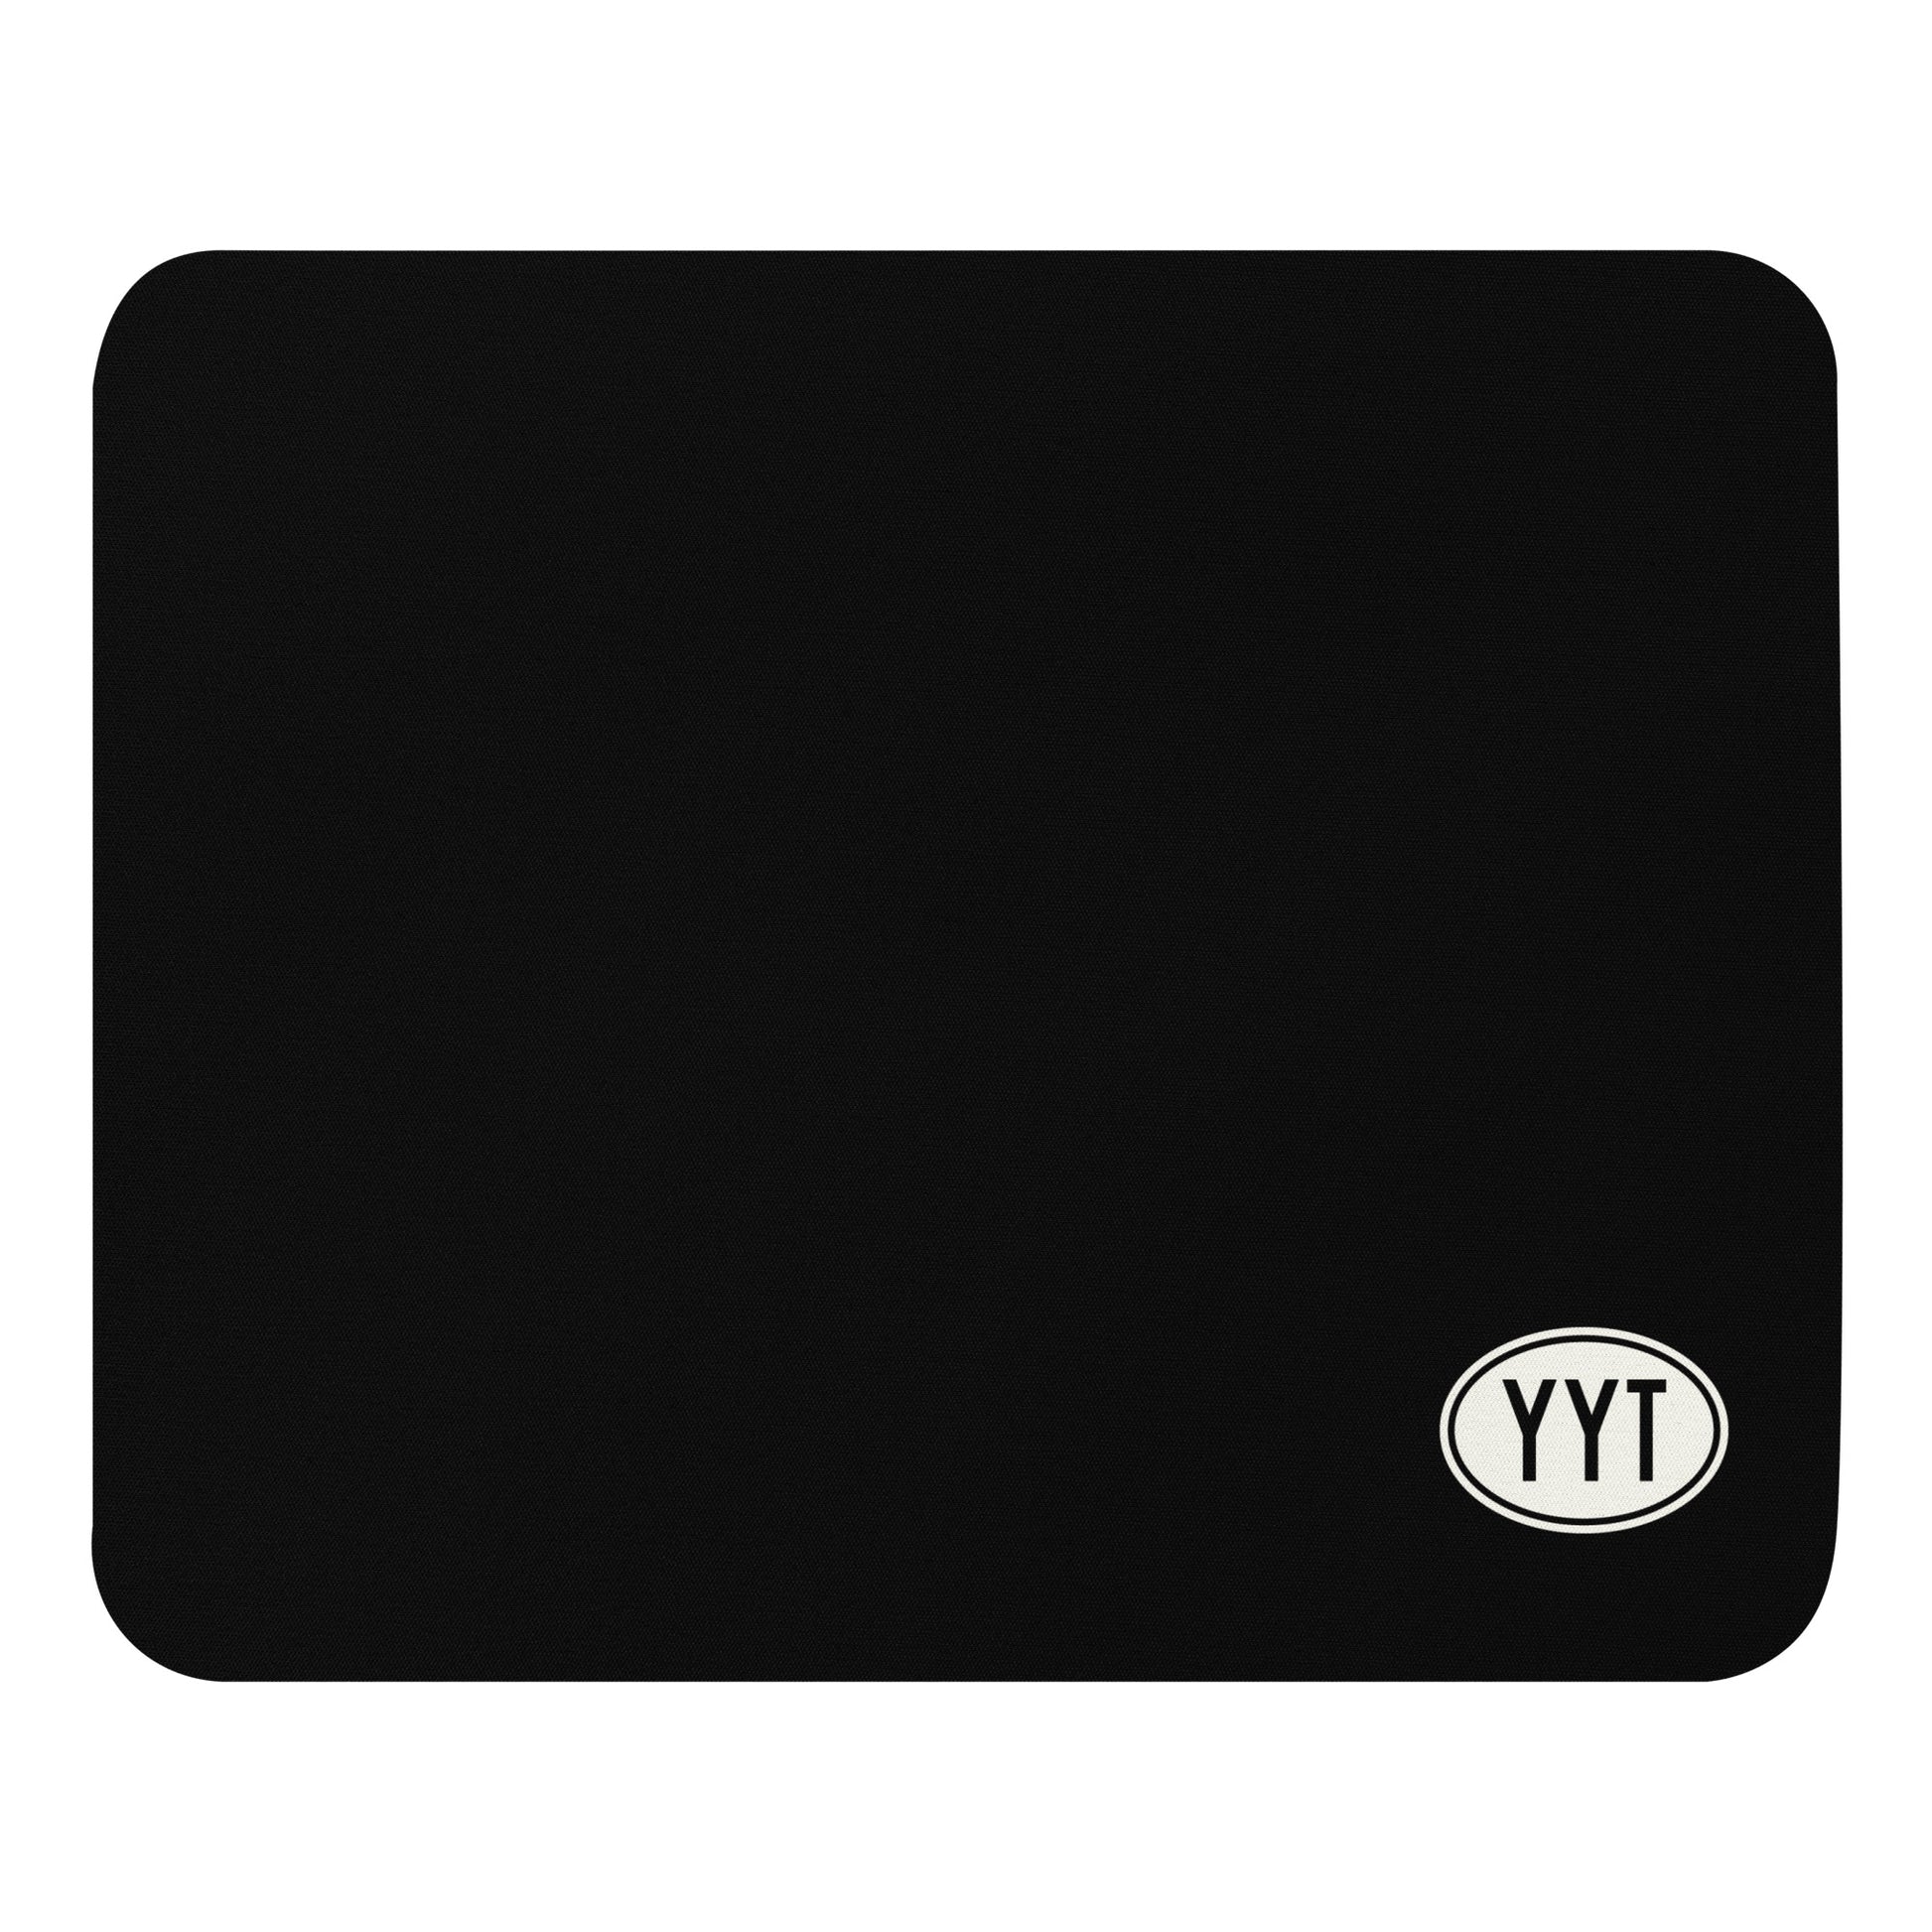 Unique Travel Gift Mouse Pad - White Oval • YYT St. John's • YHM Designs - Image 01